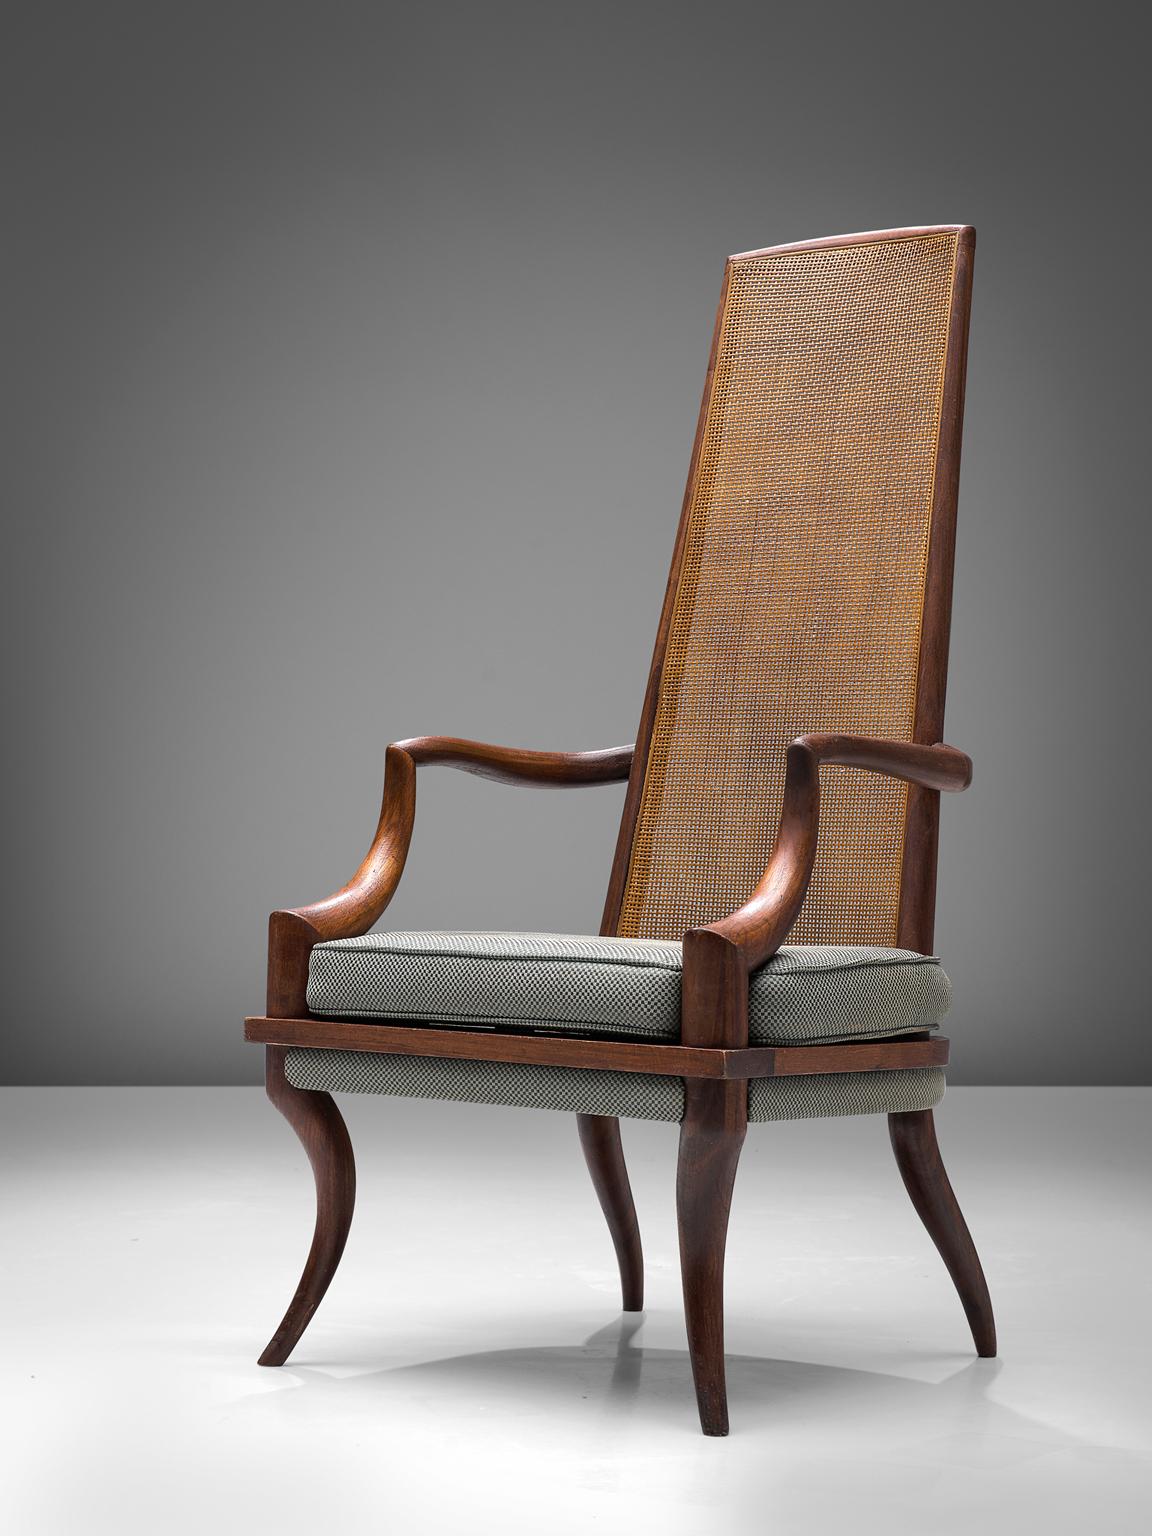 Grand Ledge Chair Co., high back chair, United States, 1950s.

Very elegant high back chair designed by Robsjohn-Gibbings and manufactured by Grand Ledge Chair company in the 1950s. This throne chair features a high back with cane, which combines